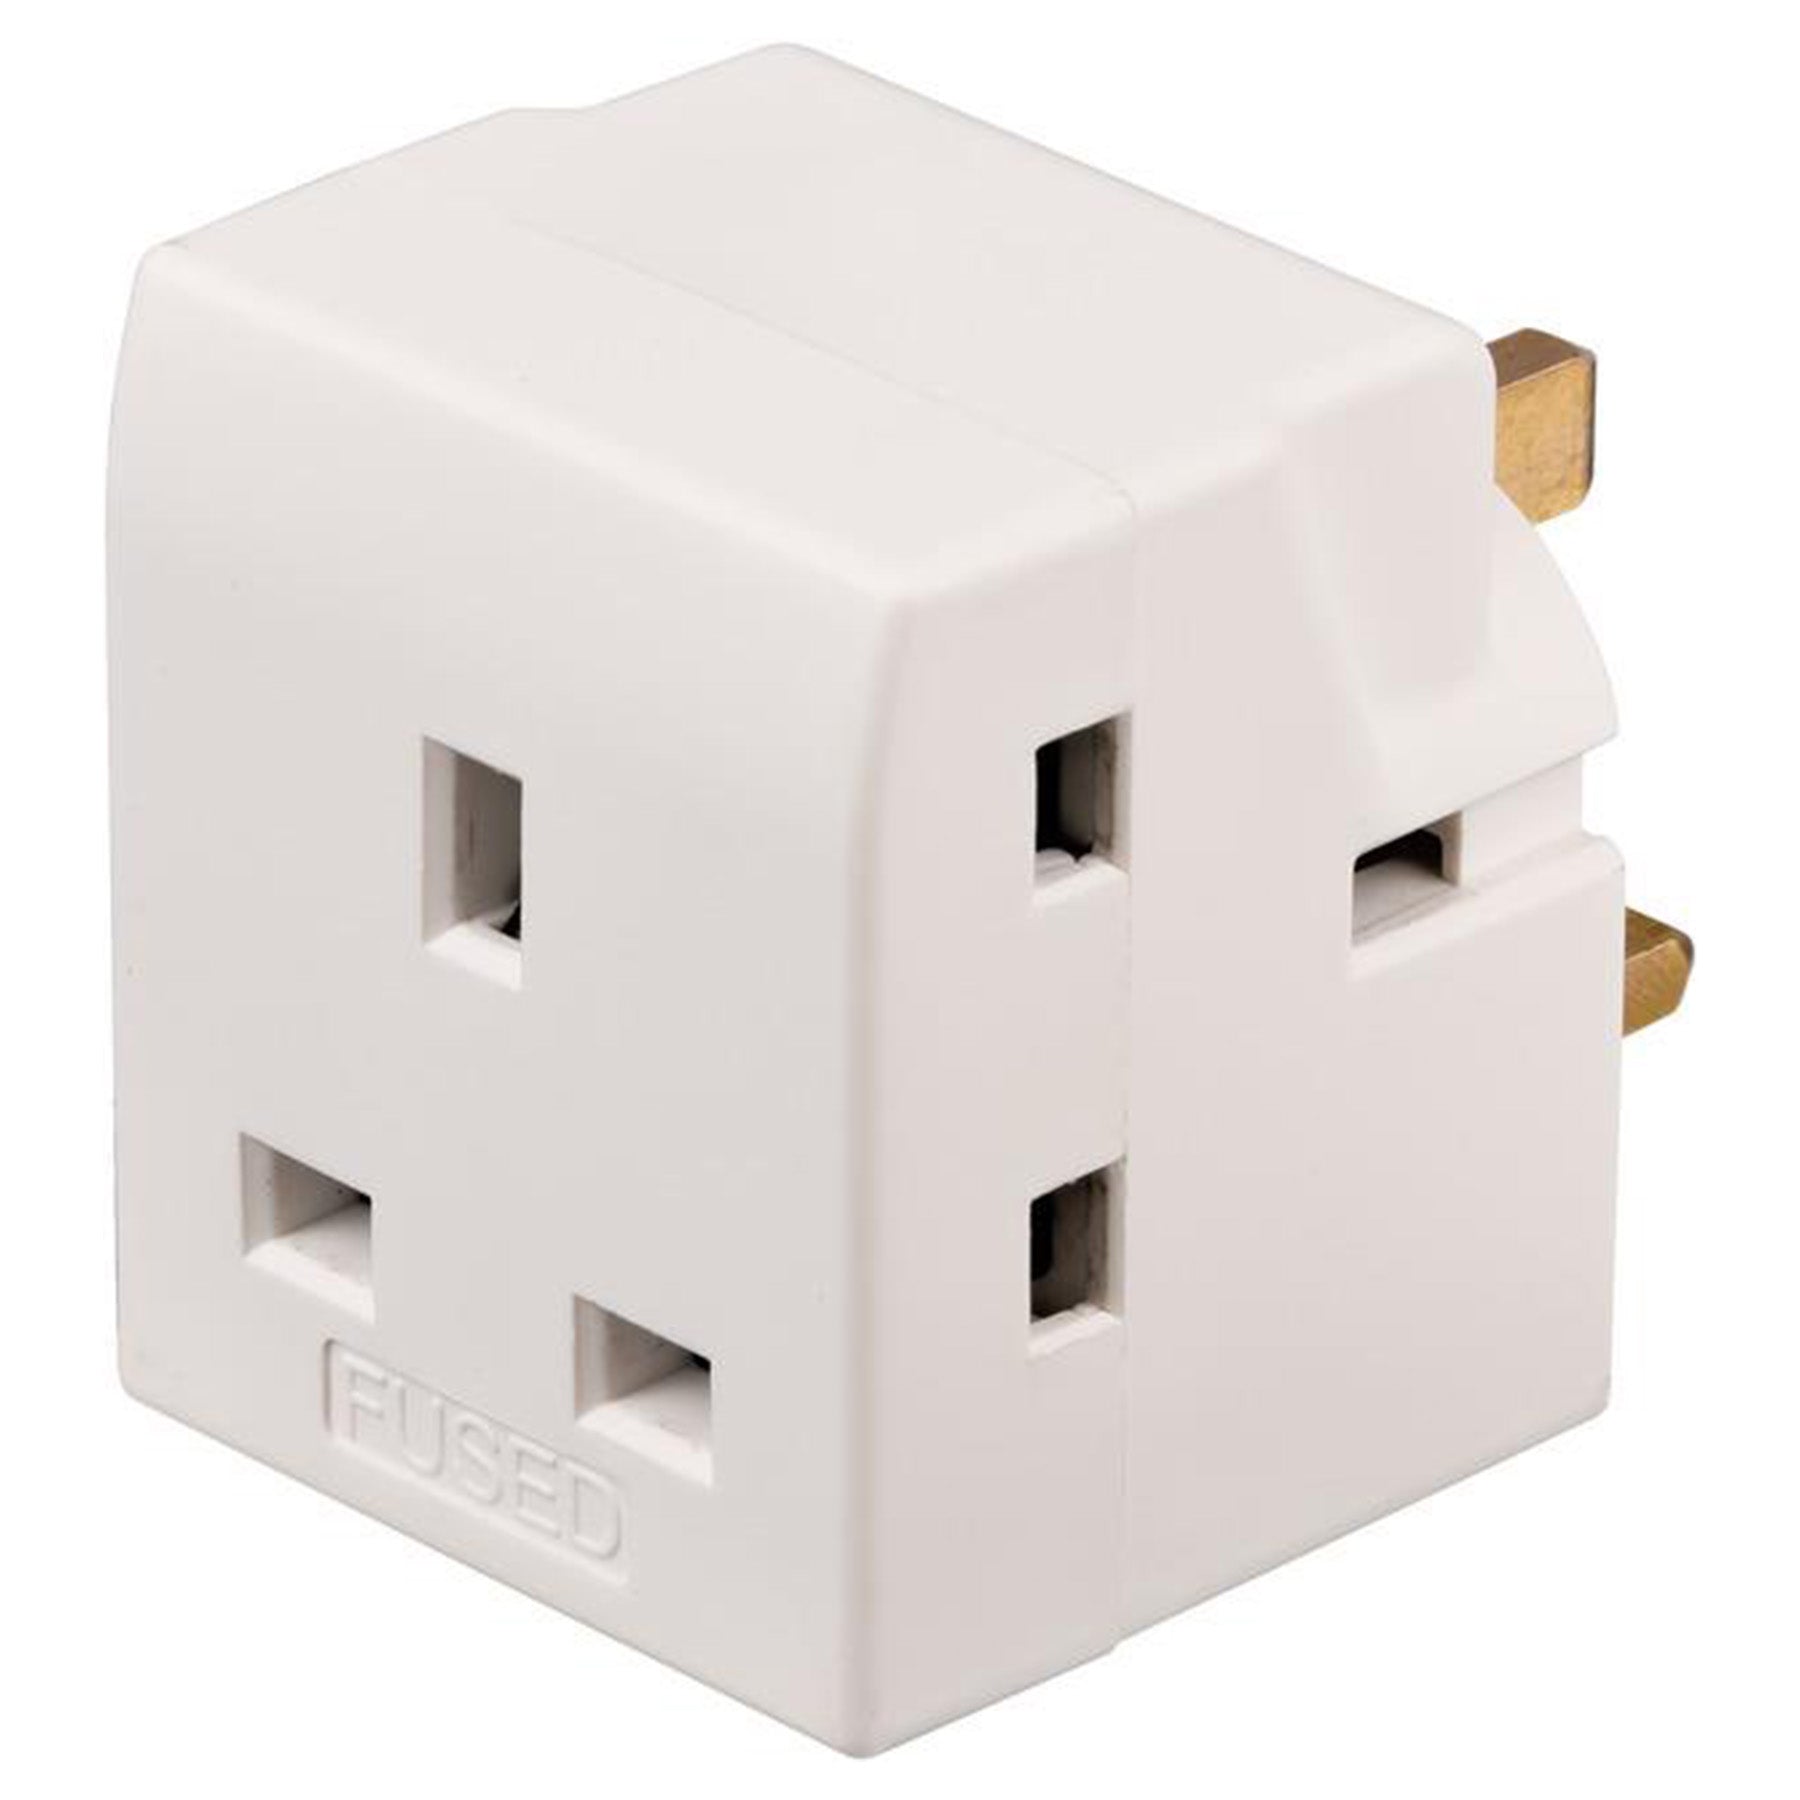 Adaptor with 3 Sockets , White Color